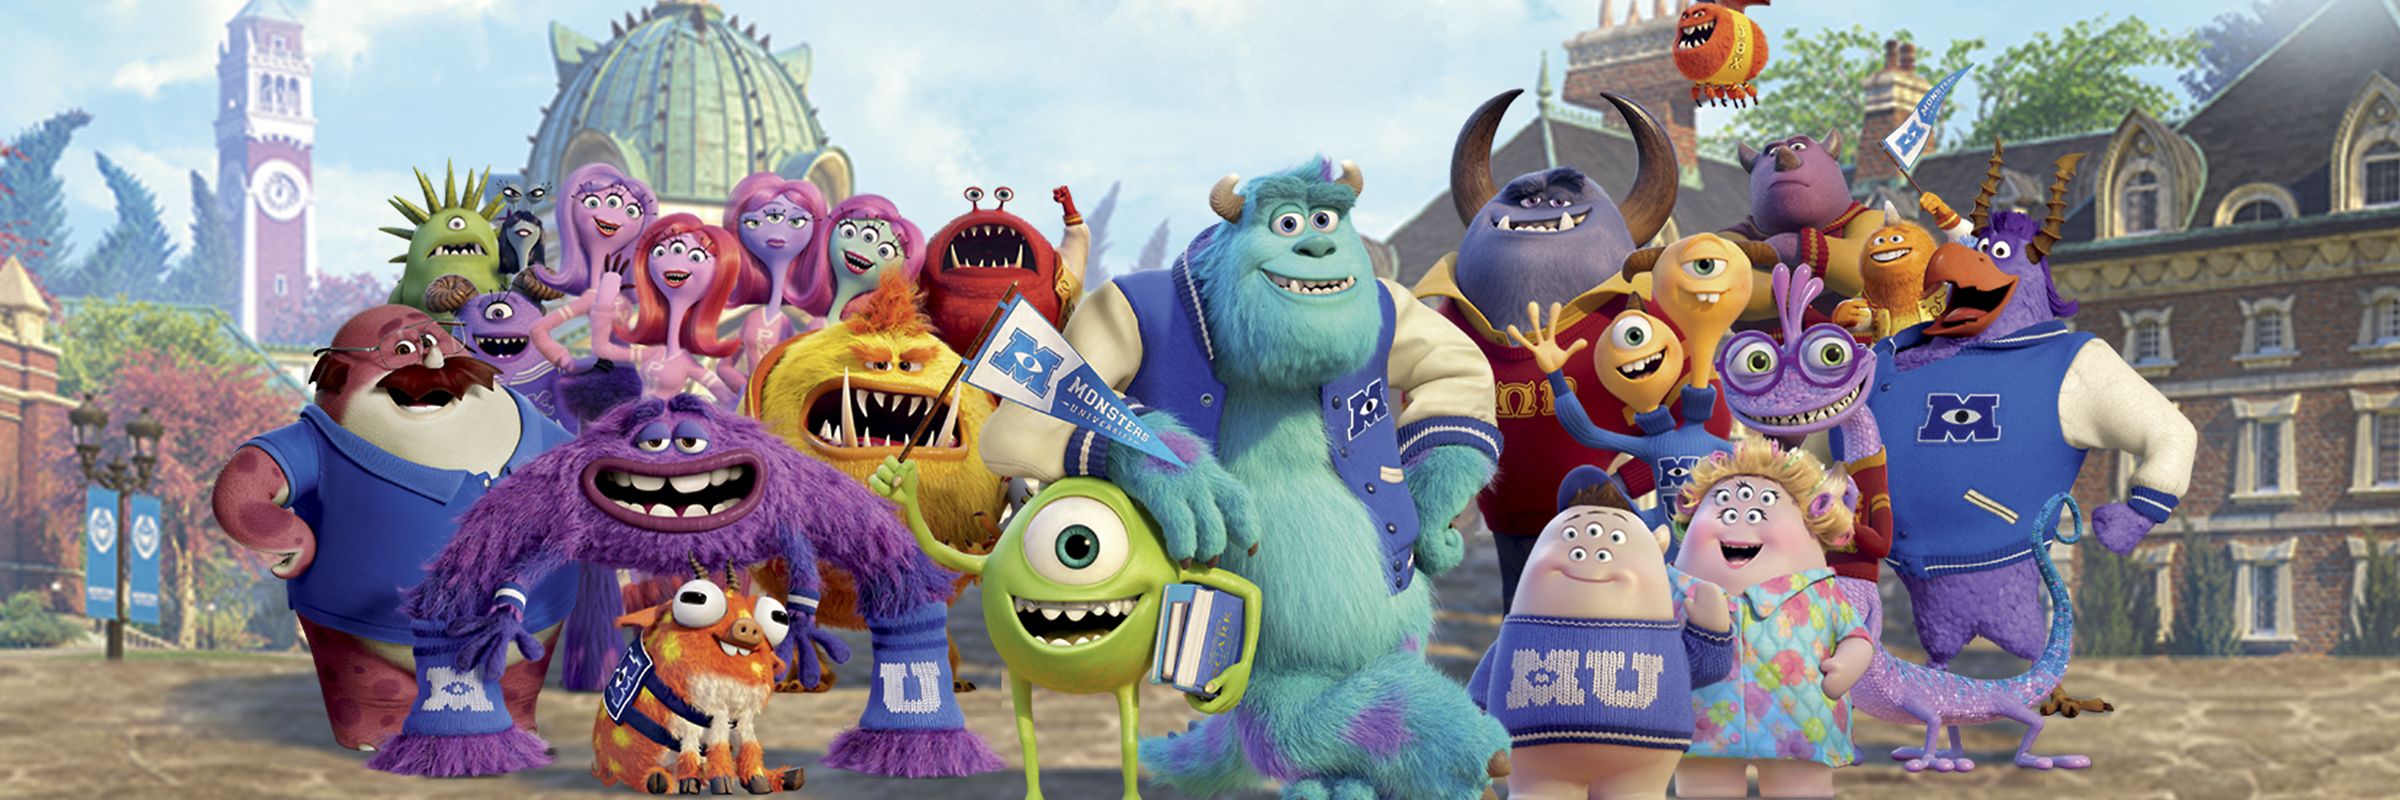 Will There be a ‘Monsters, Inc.’ 3?